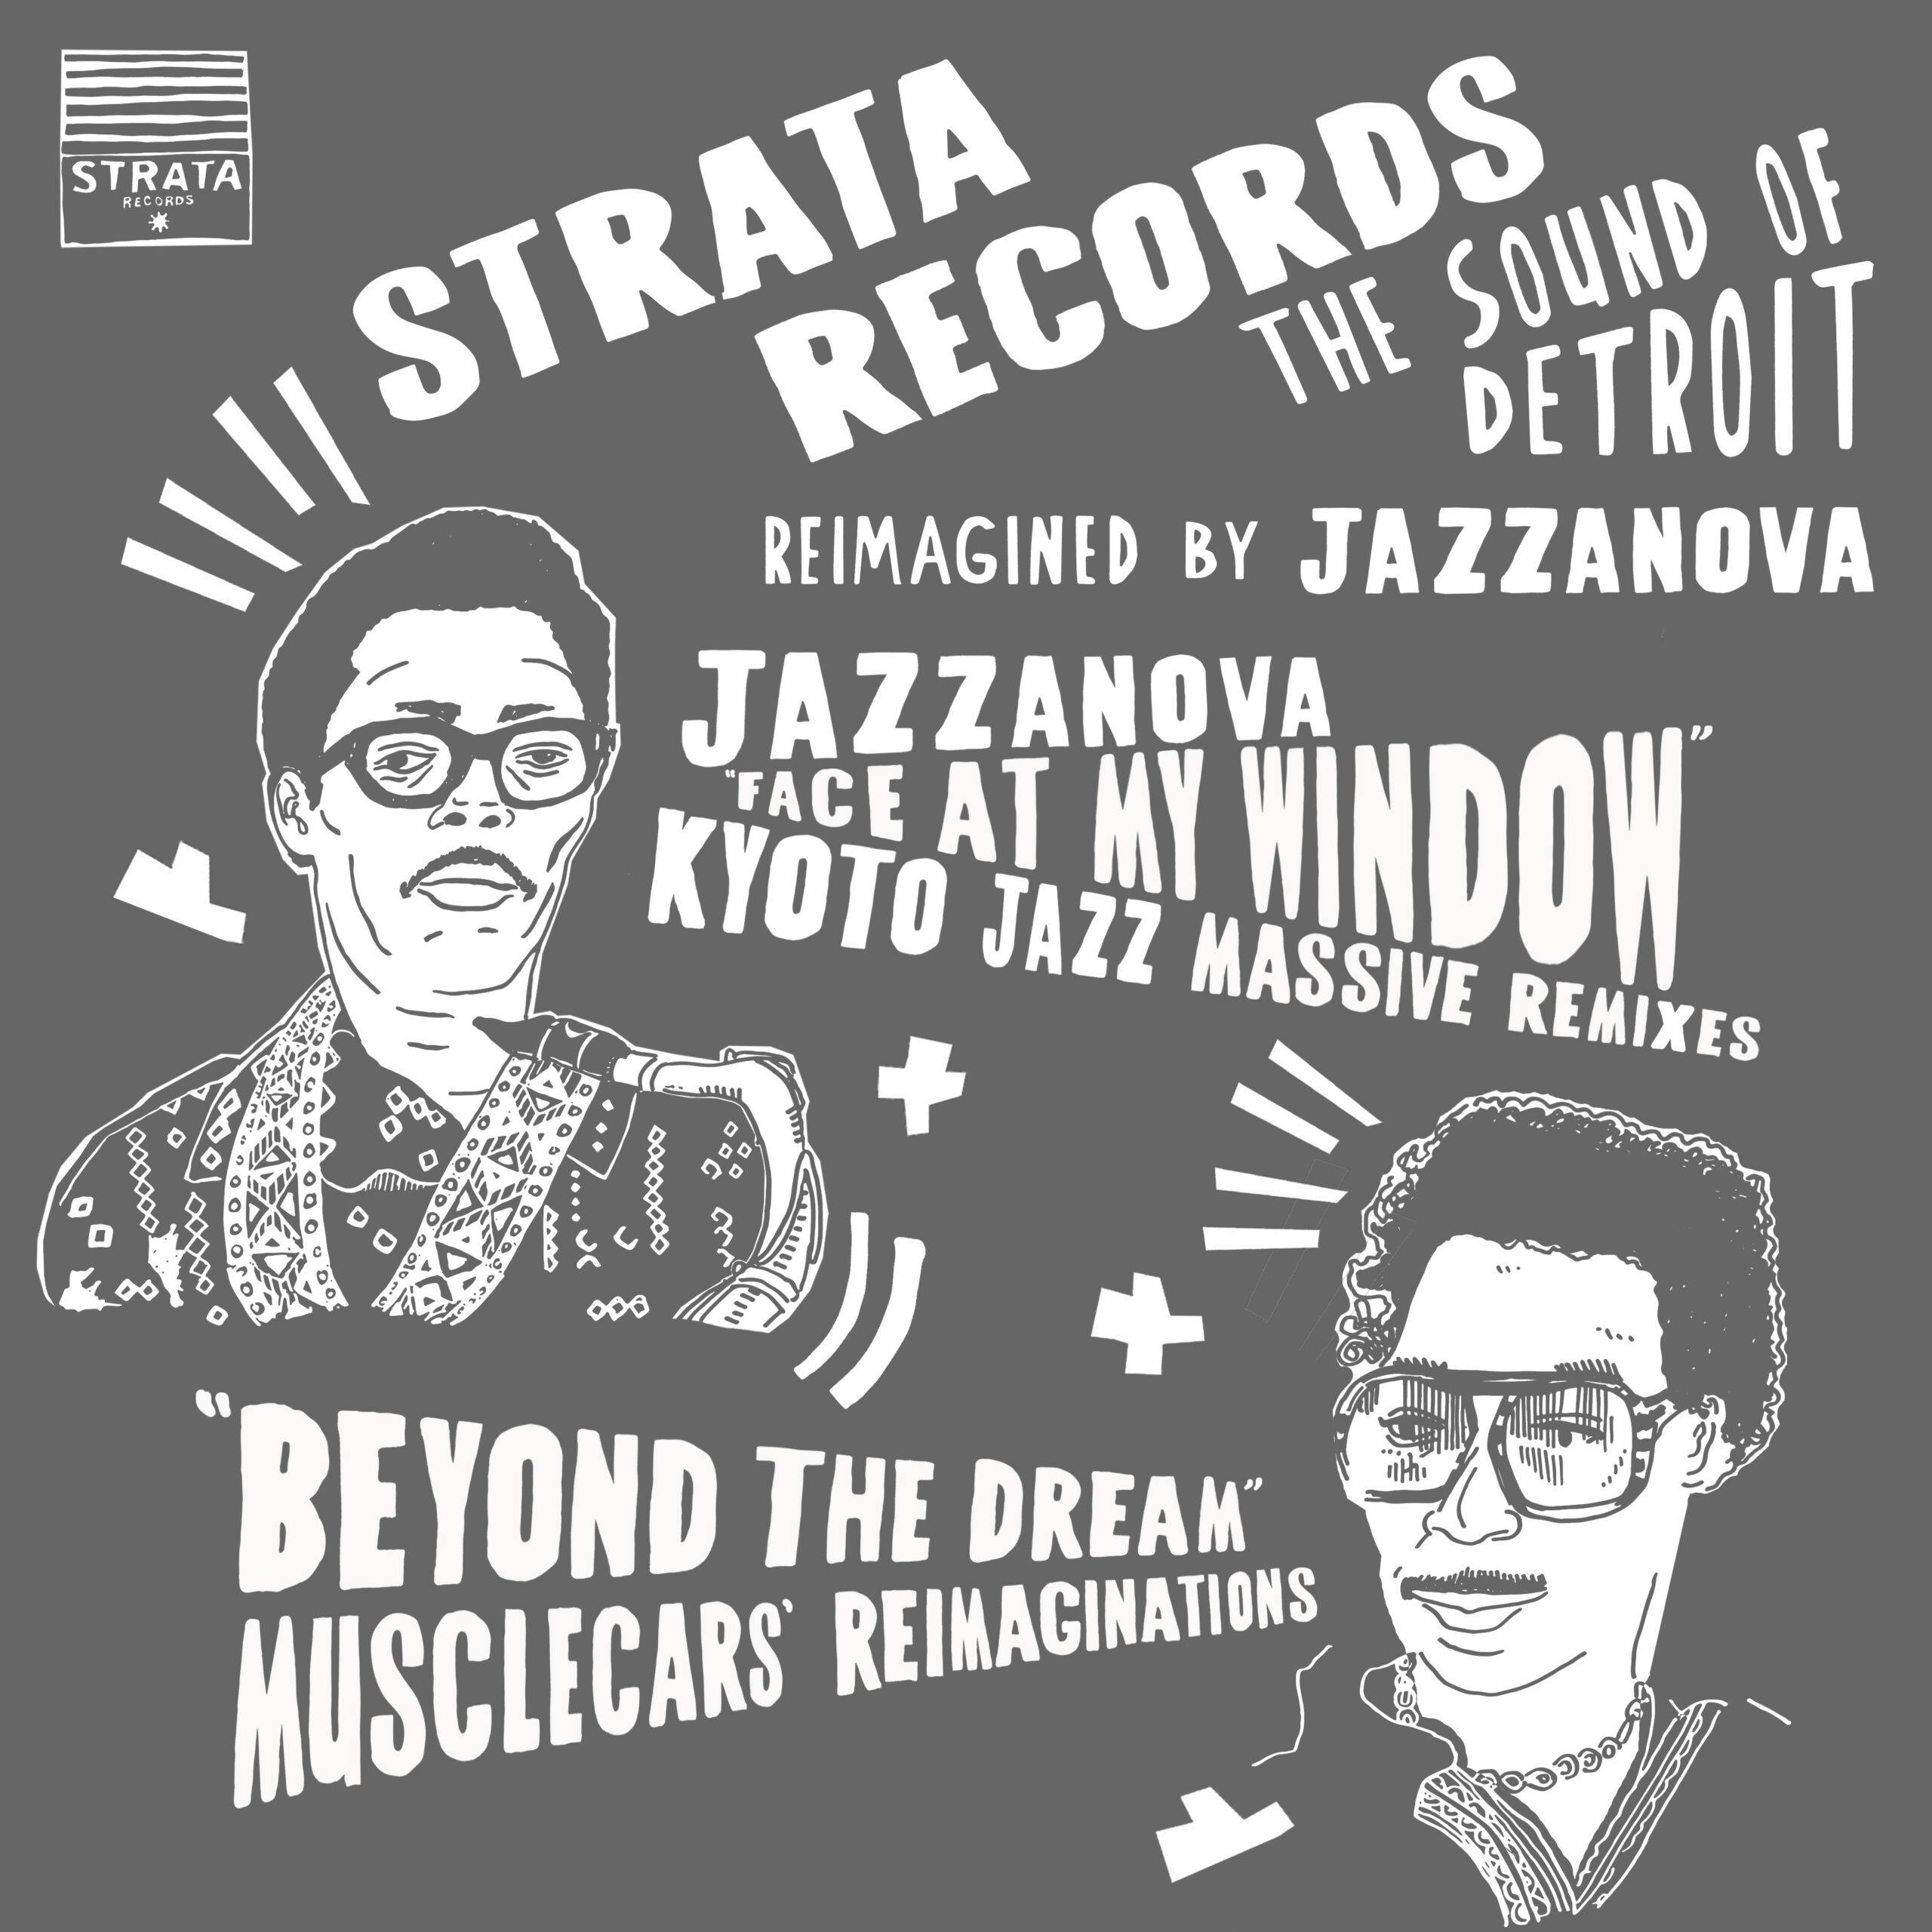 Taken from the album ‘Strata Records – The Sound of Detroit – Reimagined by Jazzanova’, BBE Music, DJ Amir and 180 Proof records present the 3rd single from this monumental project.